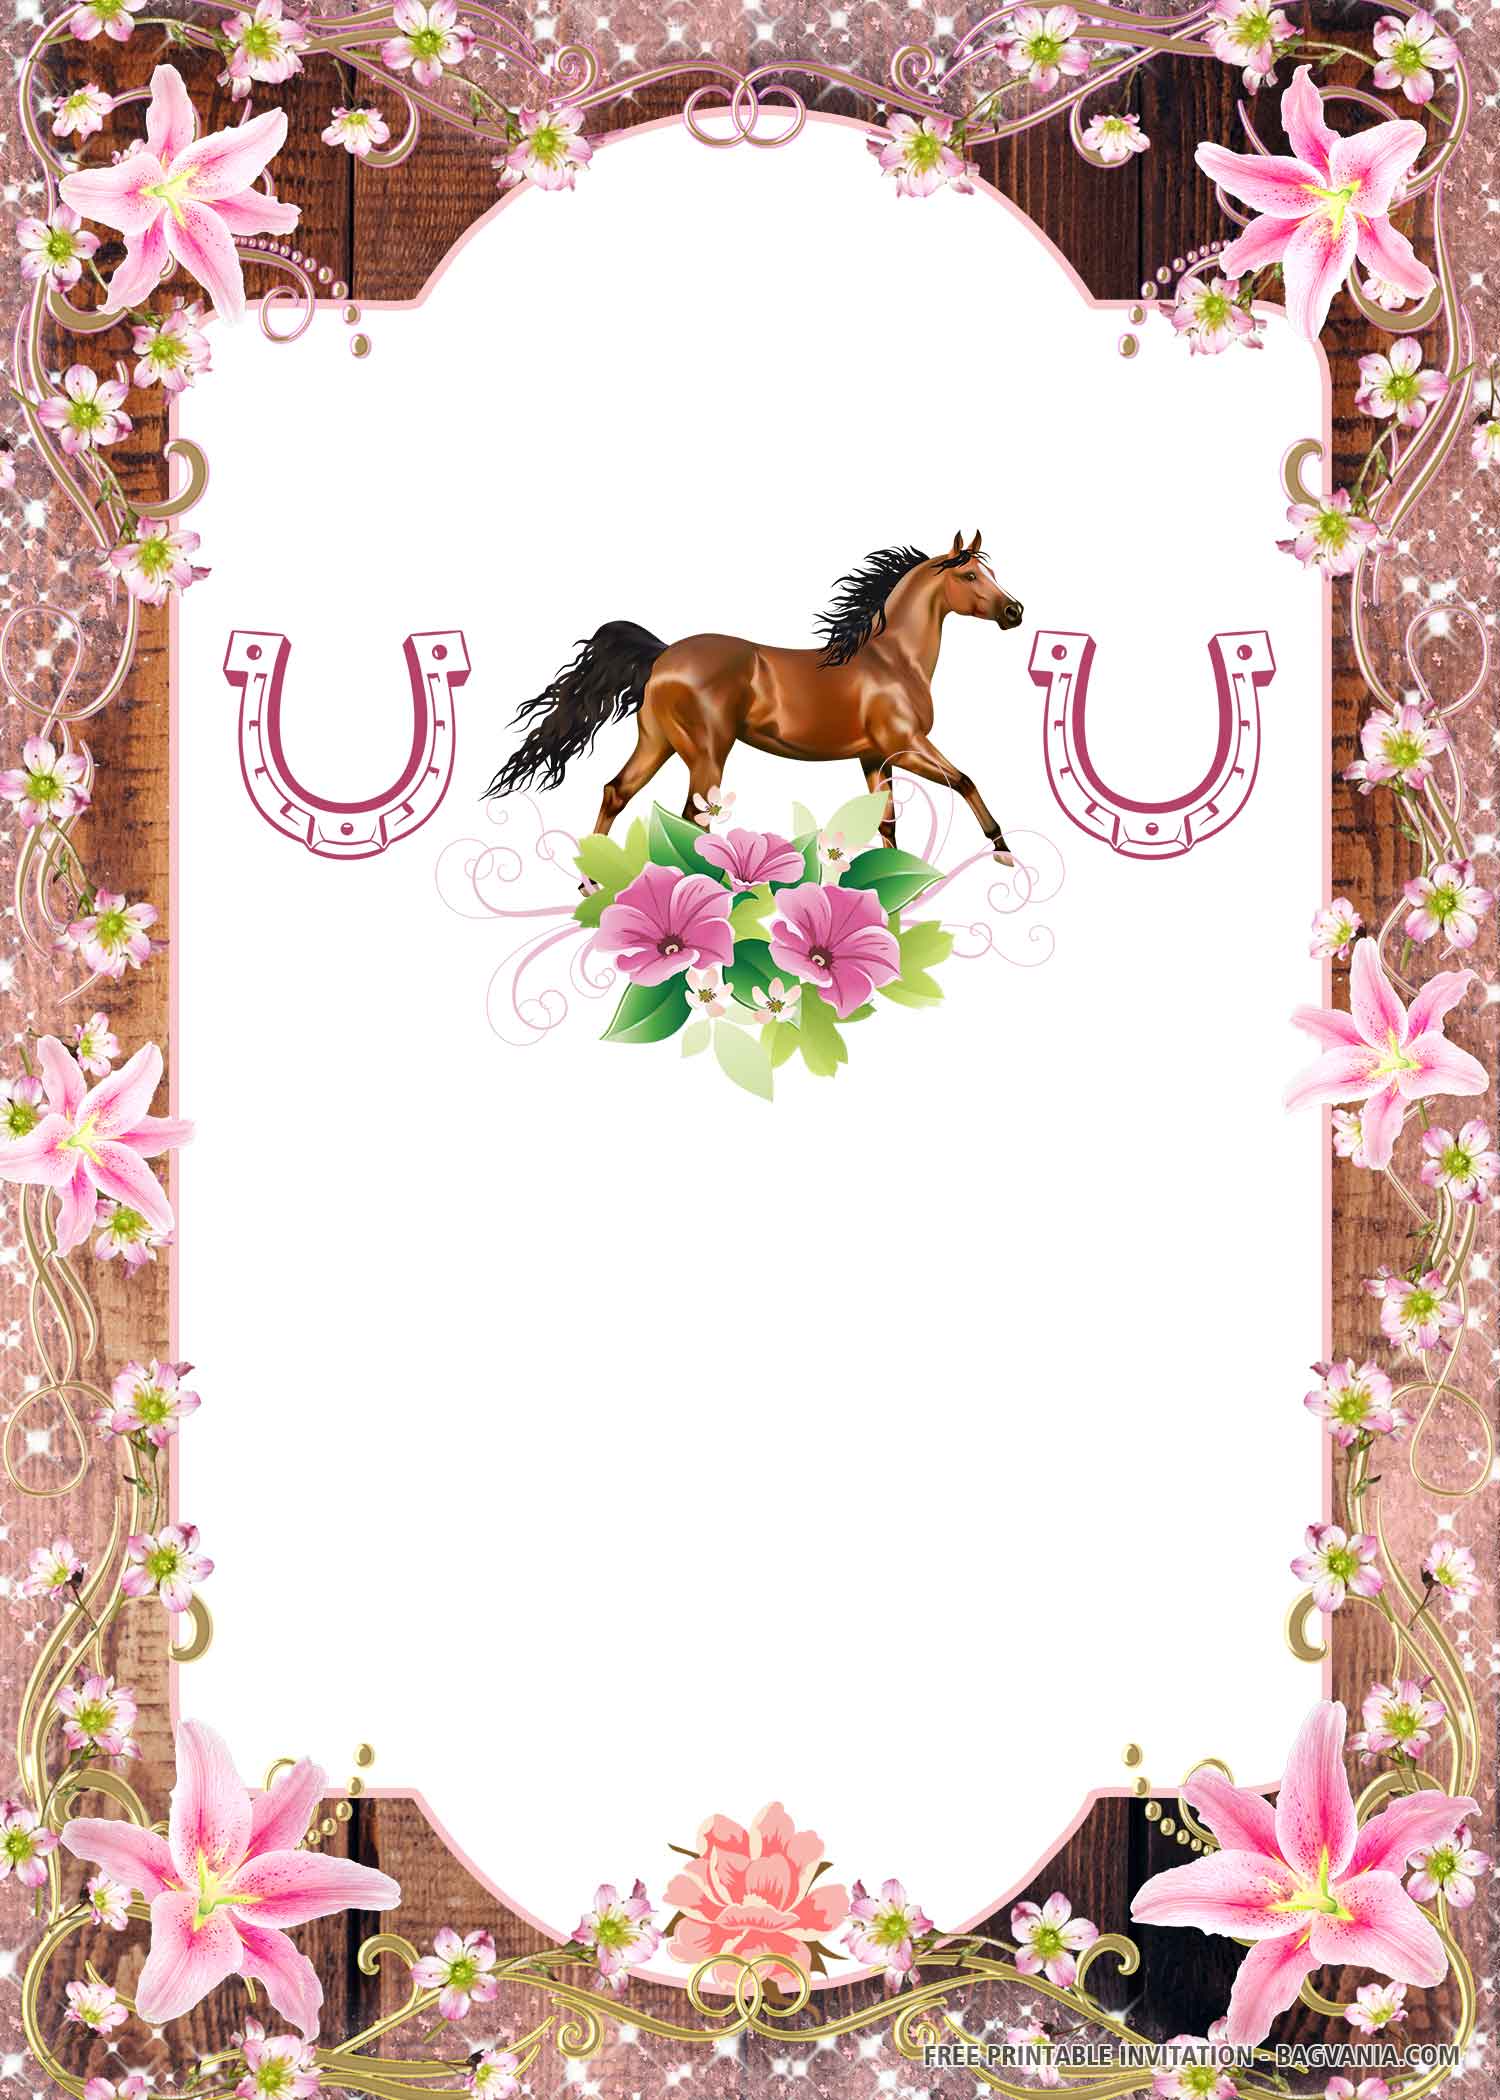 FREE Pink Horse with Horseshoes, Flowers Border, and Wood Background